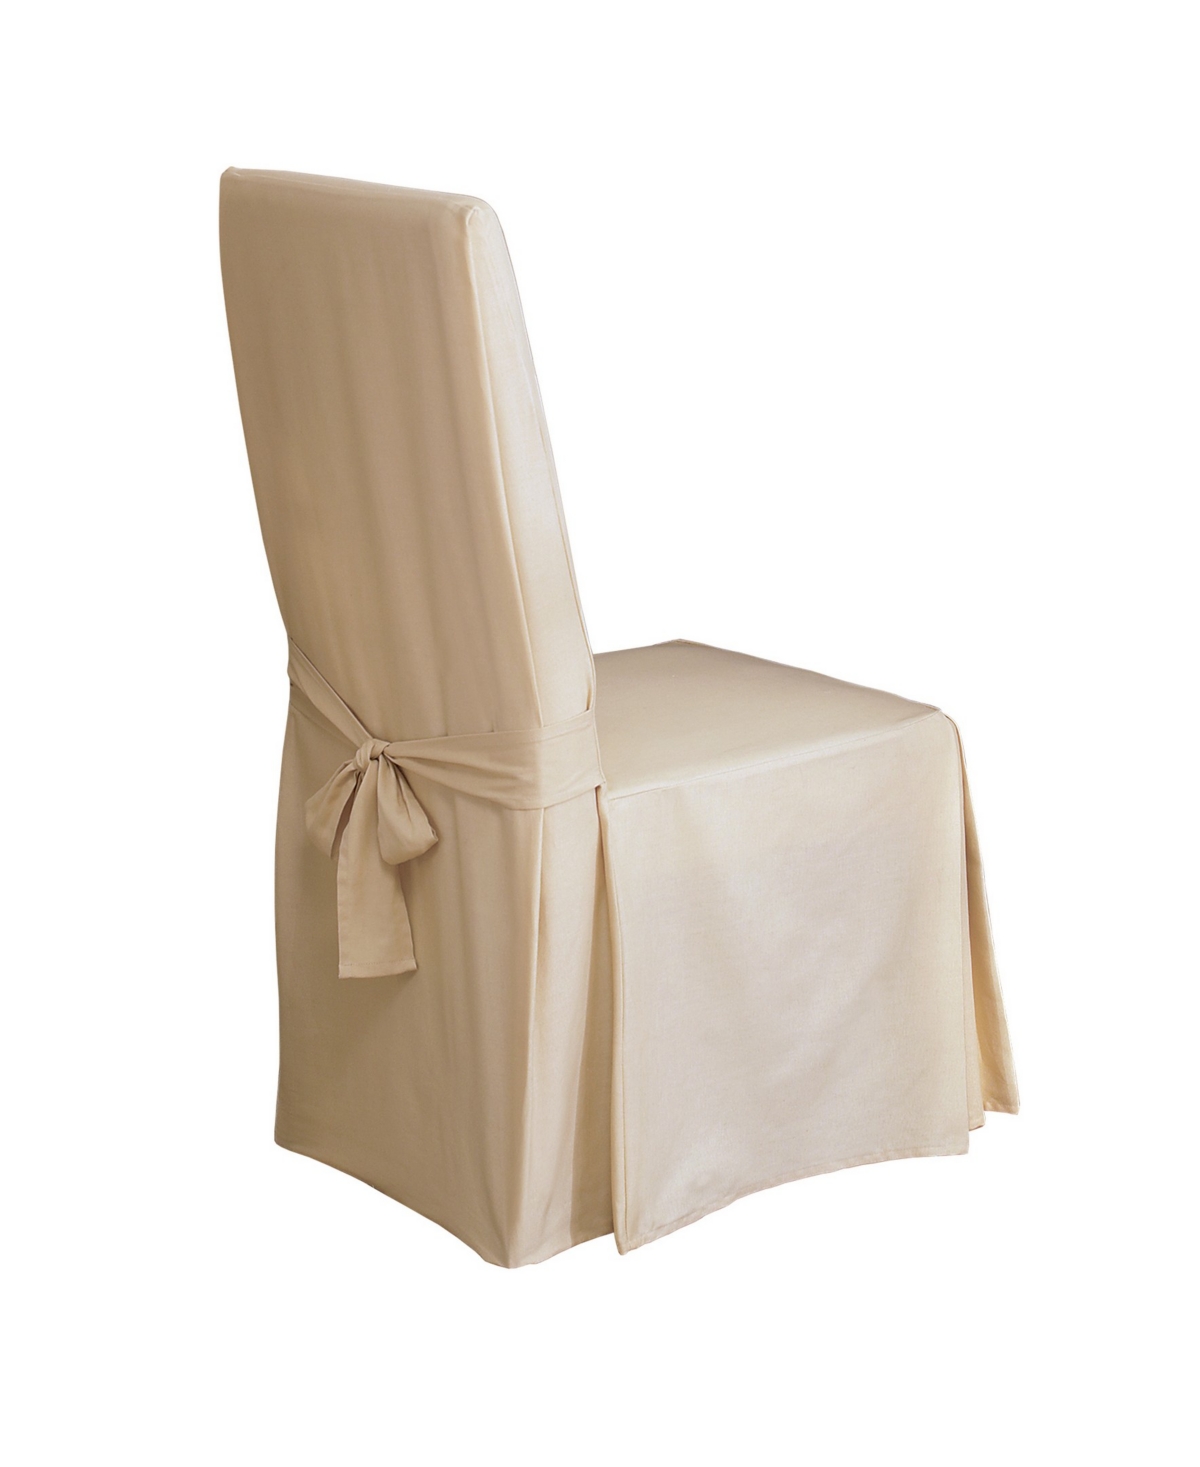 Sure Fit Duck Long Dining Chair Slipcover, 42" X 19" In Natural